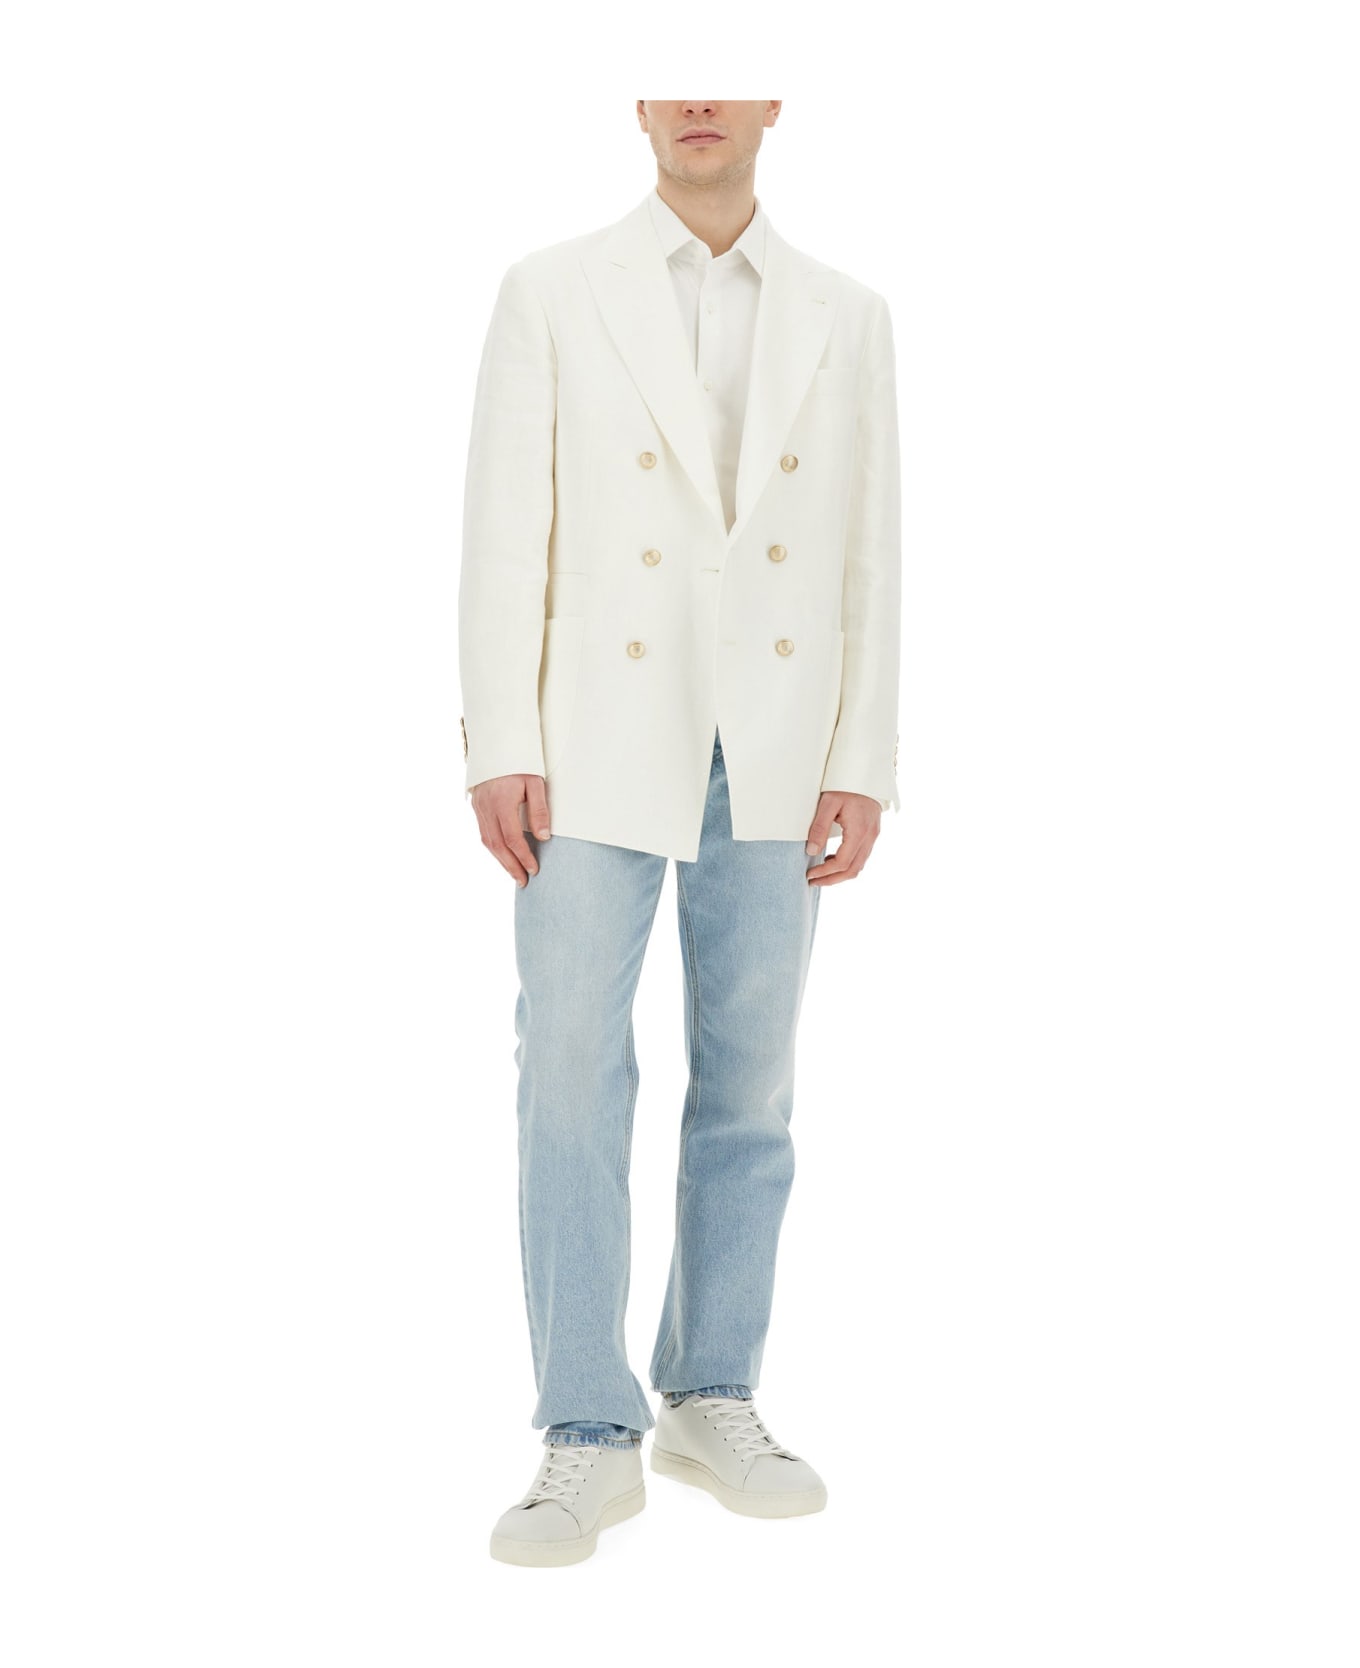 Brunello Cucinelli Double-breasted Jacket - BIANCO